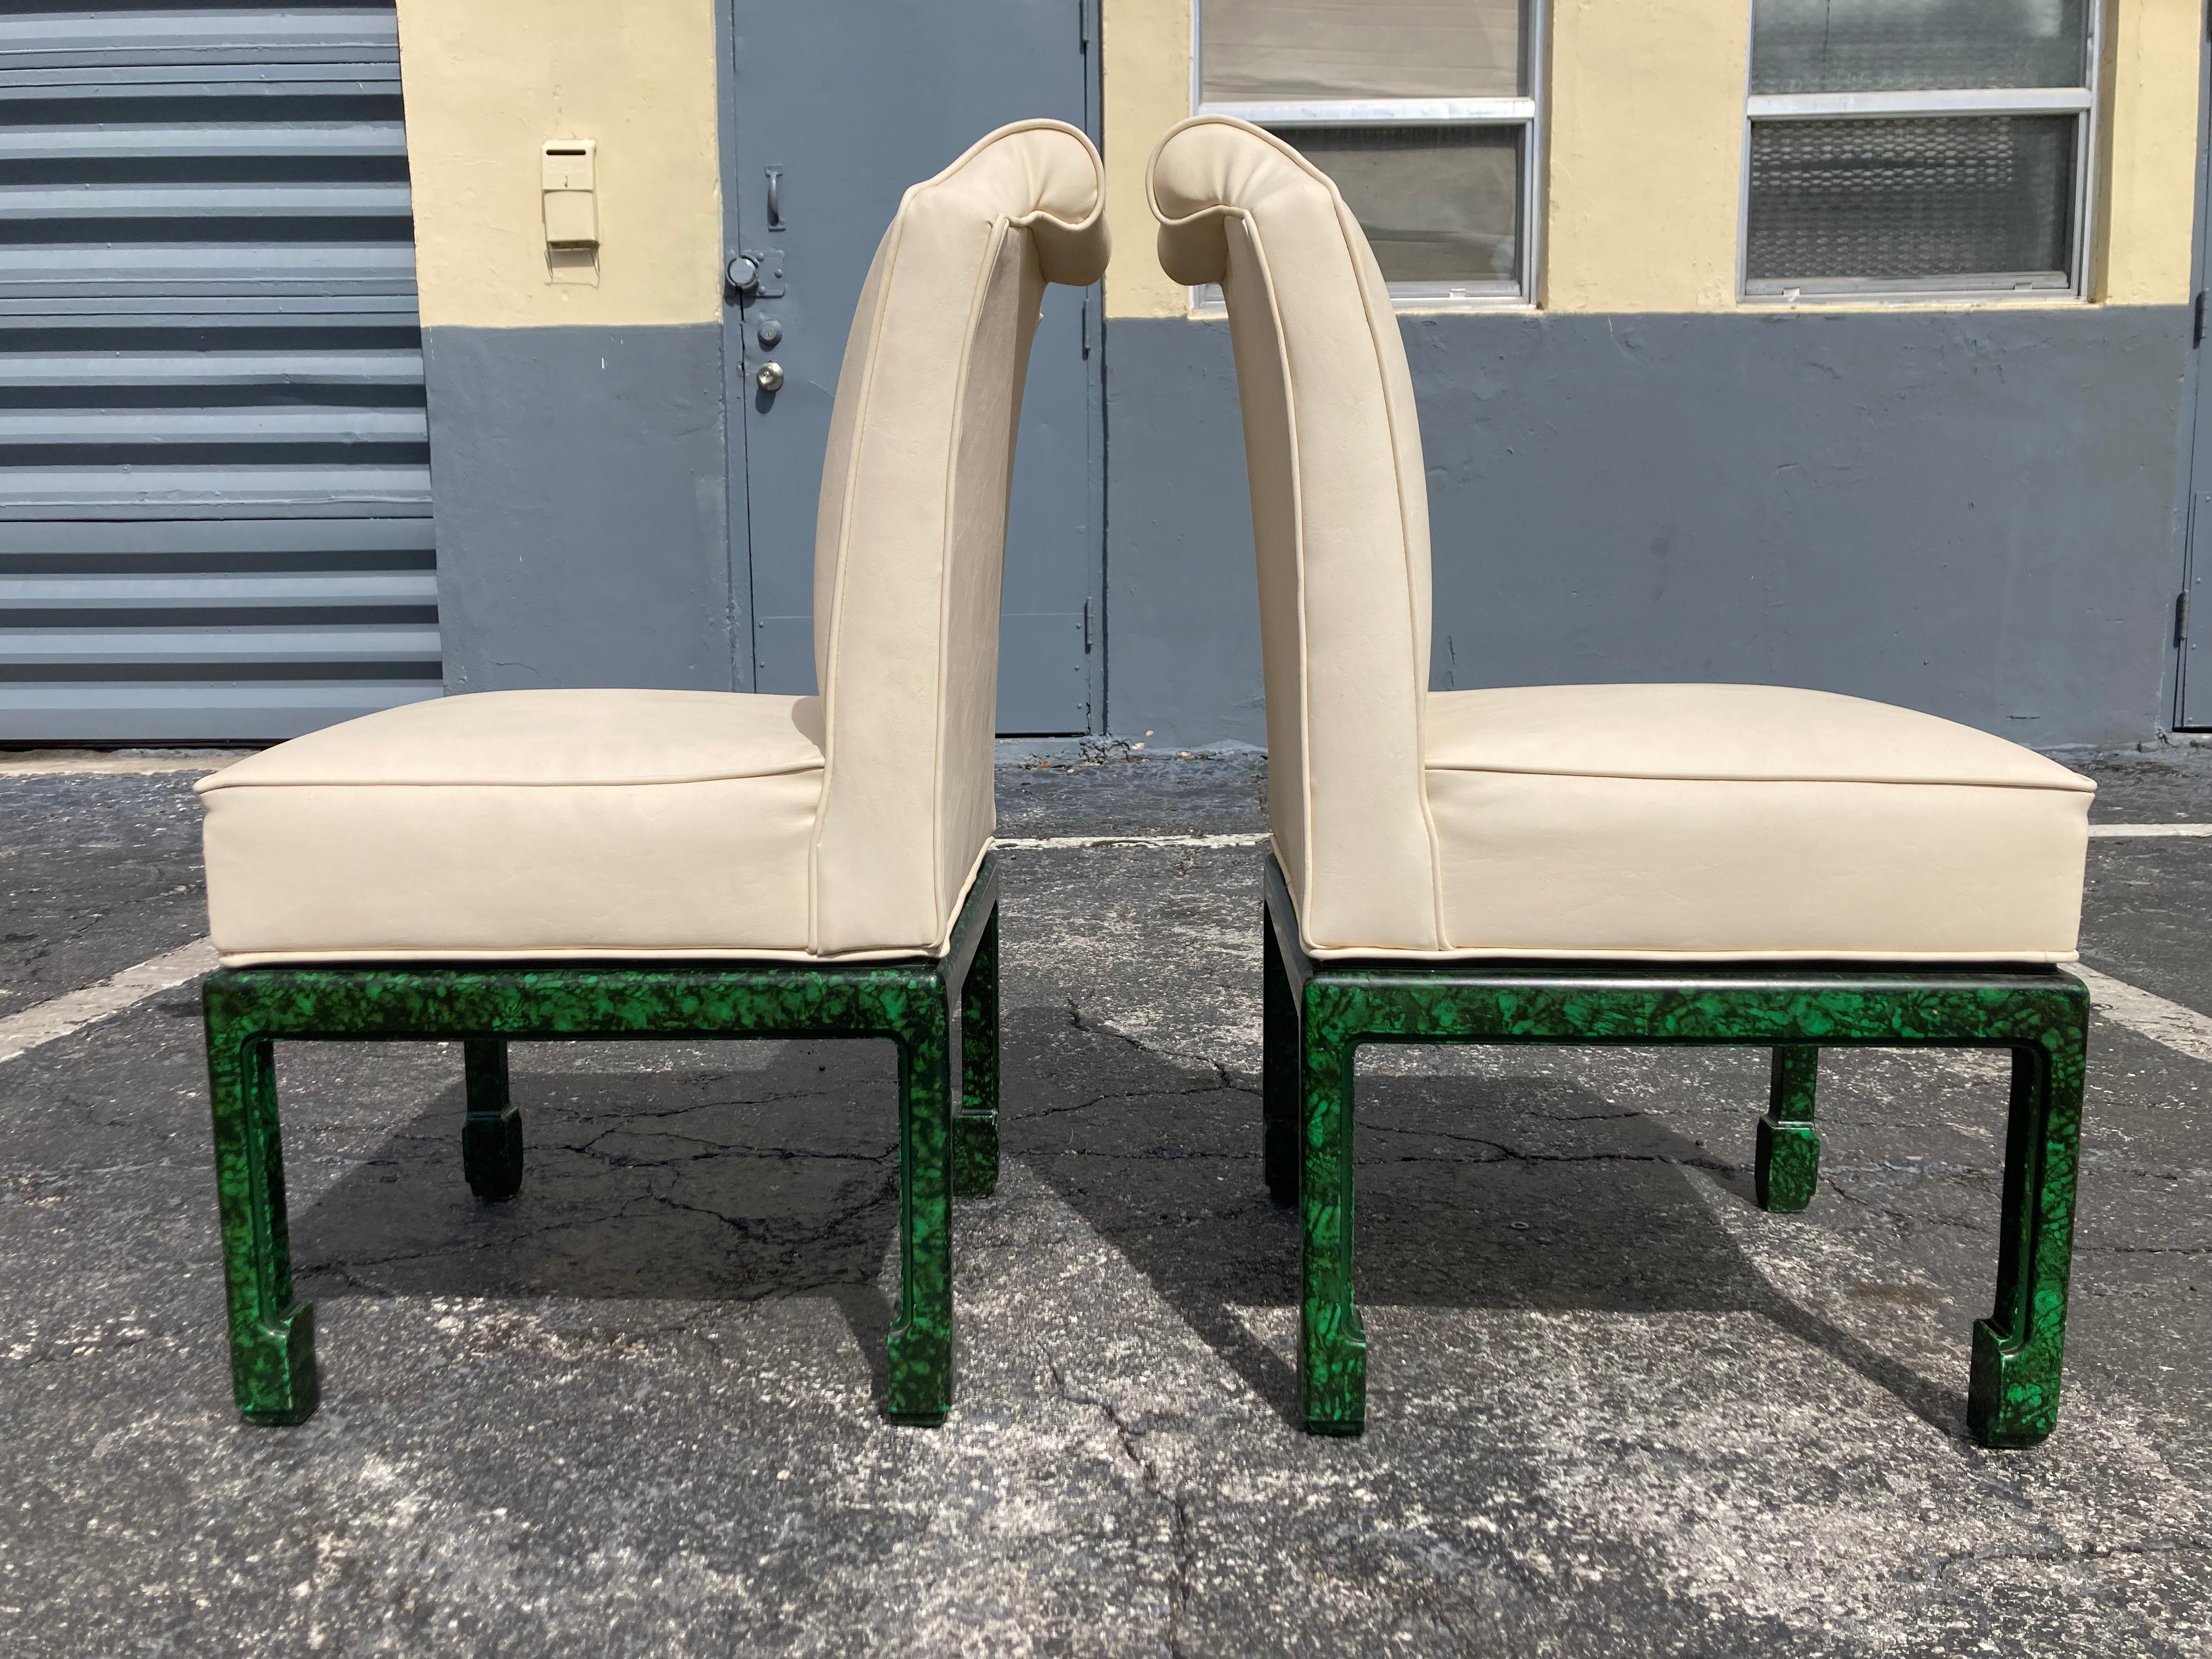 Pair of Faux Malachite Side Chairs, seats are vinyl. Good condition with some normal wear. No damages.